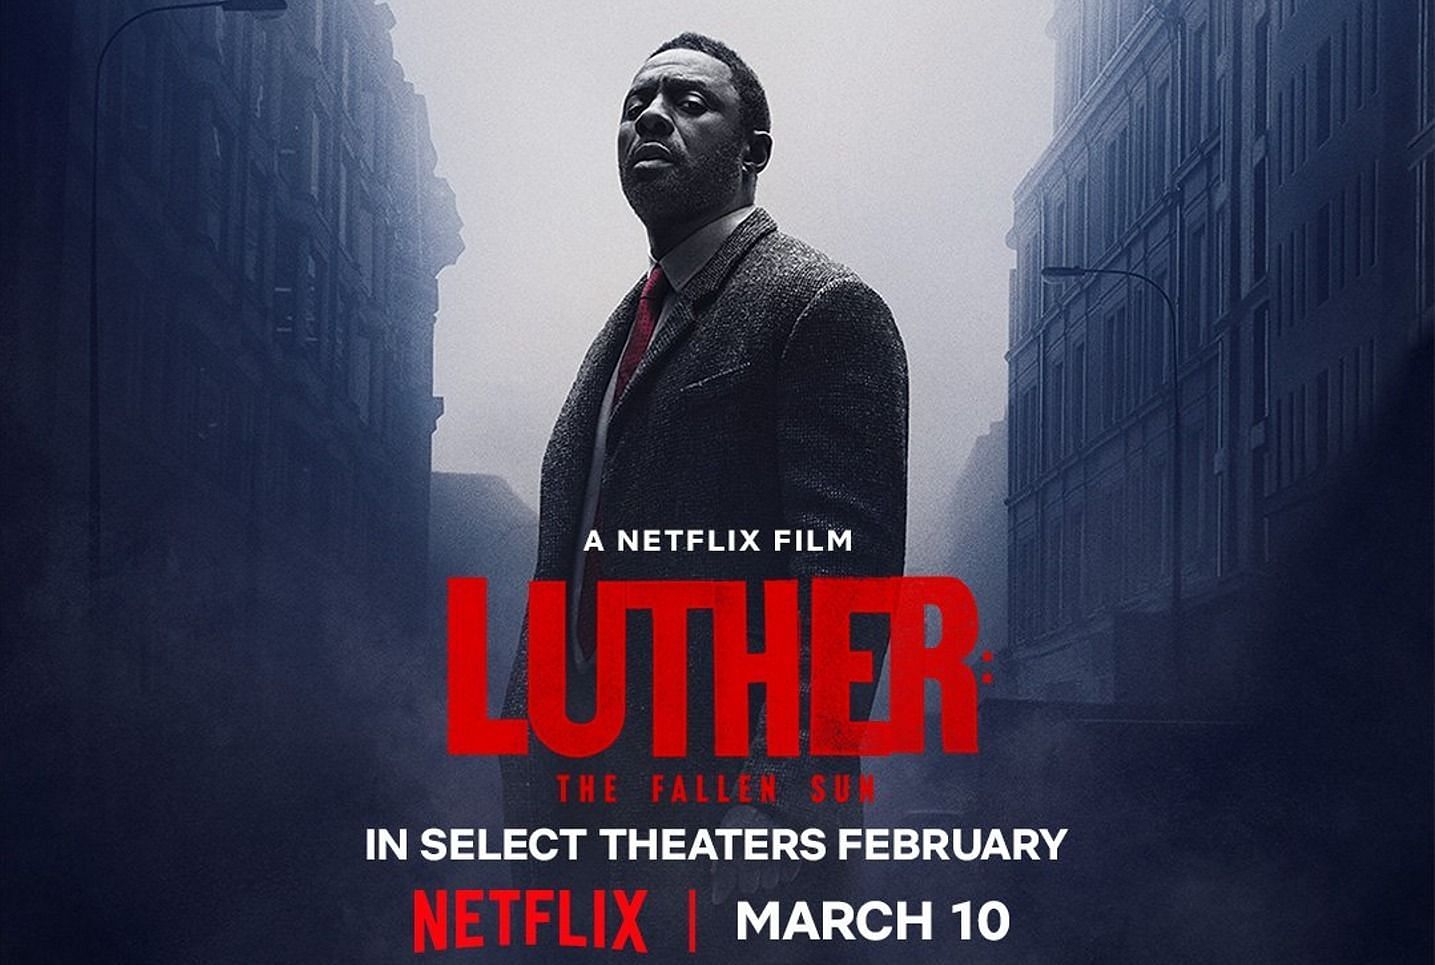 luther movie review netflix